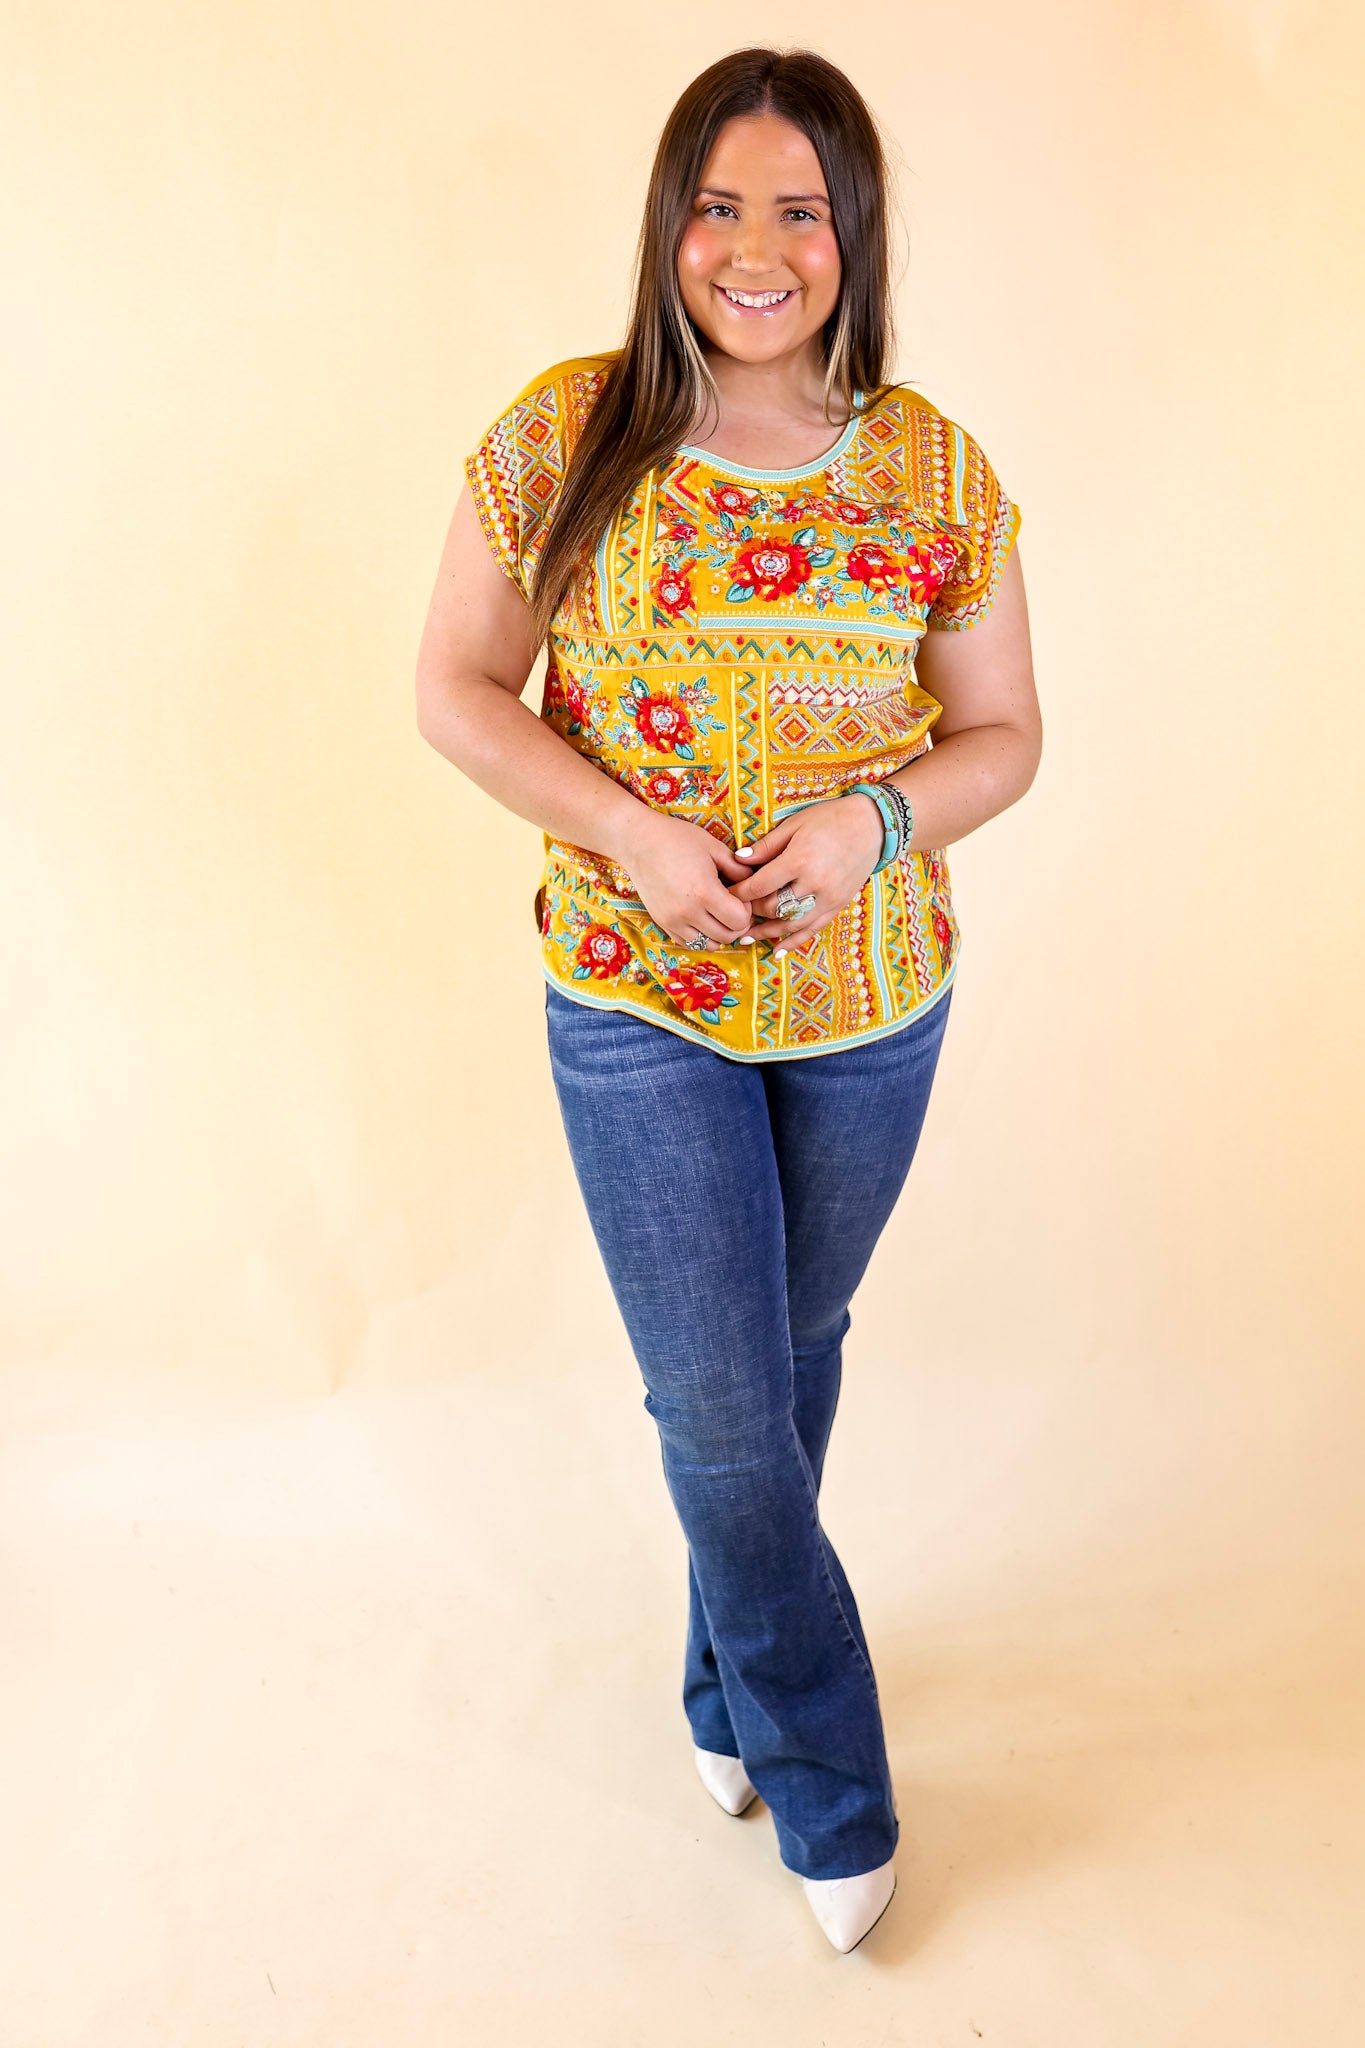 Sonoma Valley Bright Embroidered Short Sleeve Top in Marigold Yellow